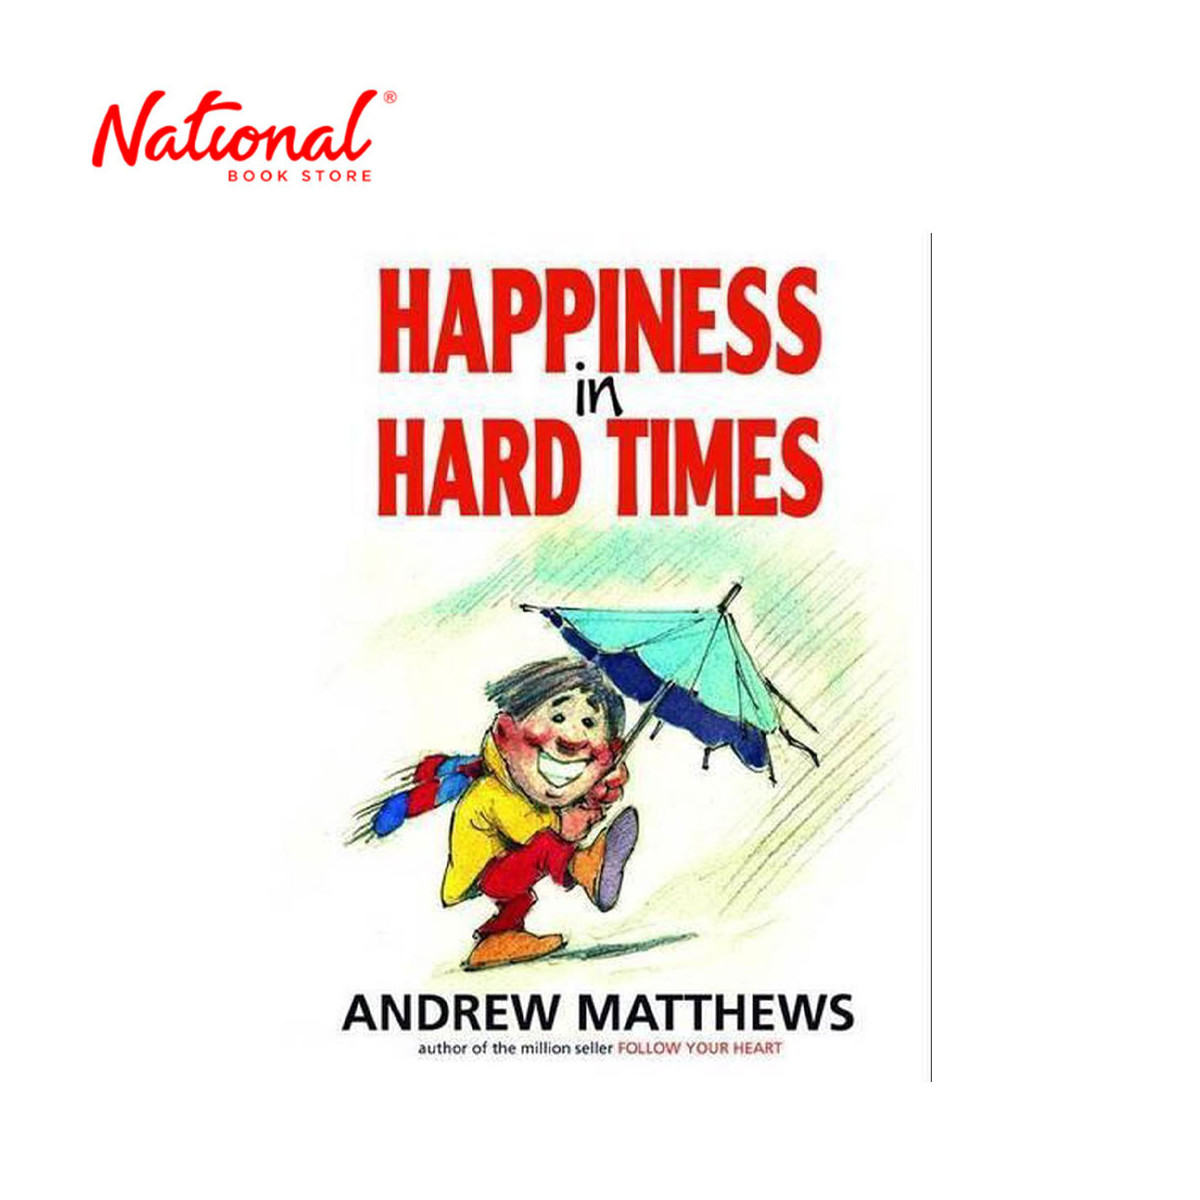 Happiness in Hard Times by Andrew Matthews Trade Paperback - Psychology & Self-Help